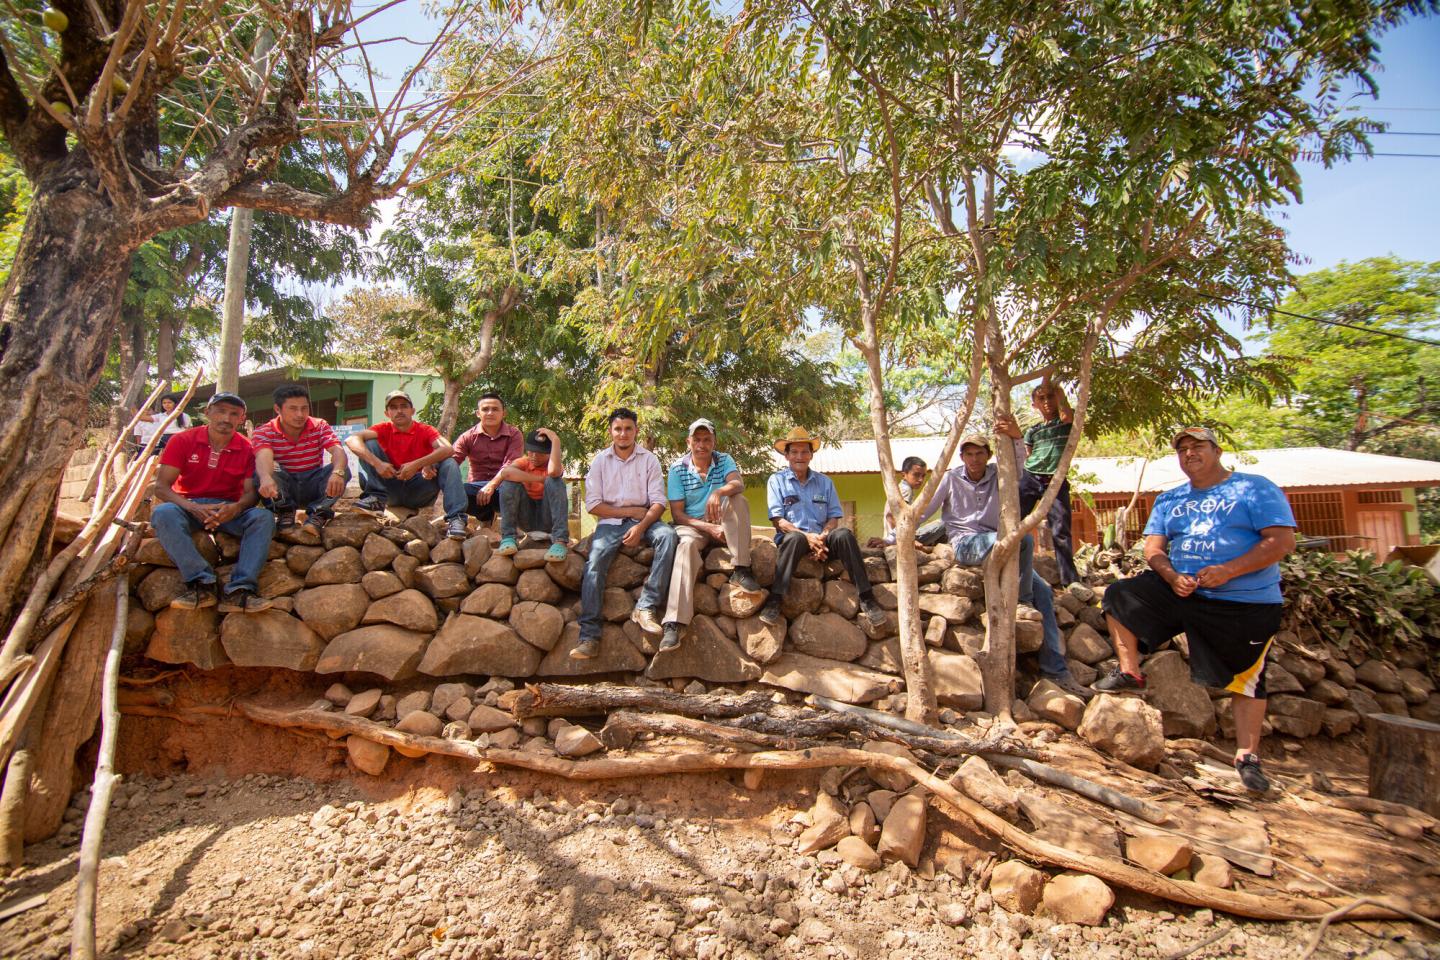 A group of Honduran men and boys sit on a stone wall